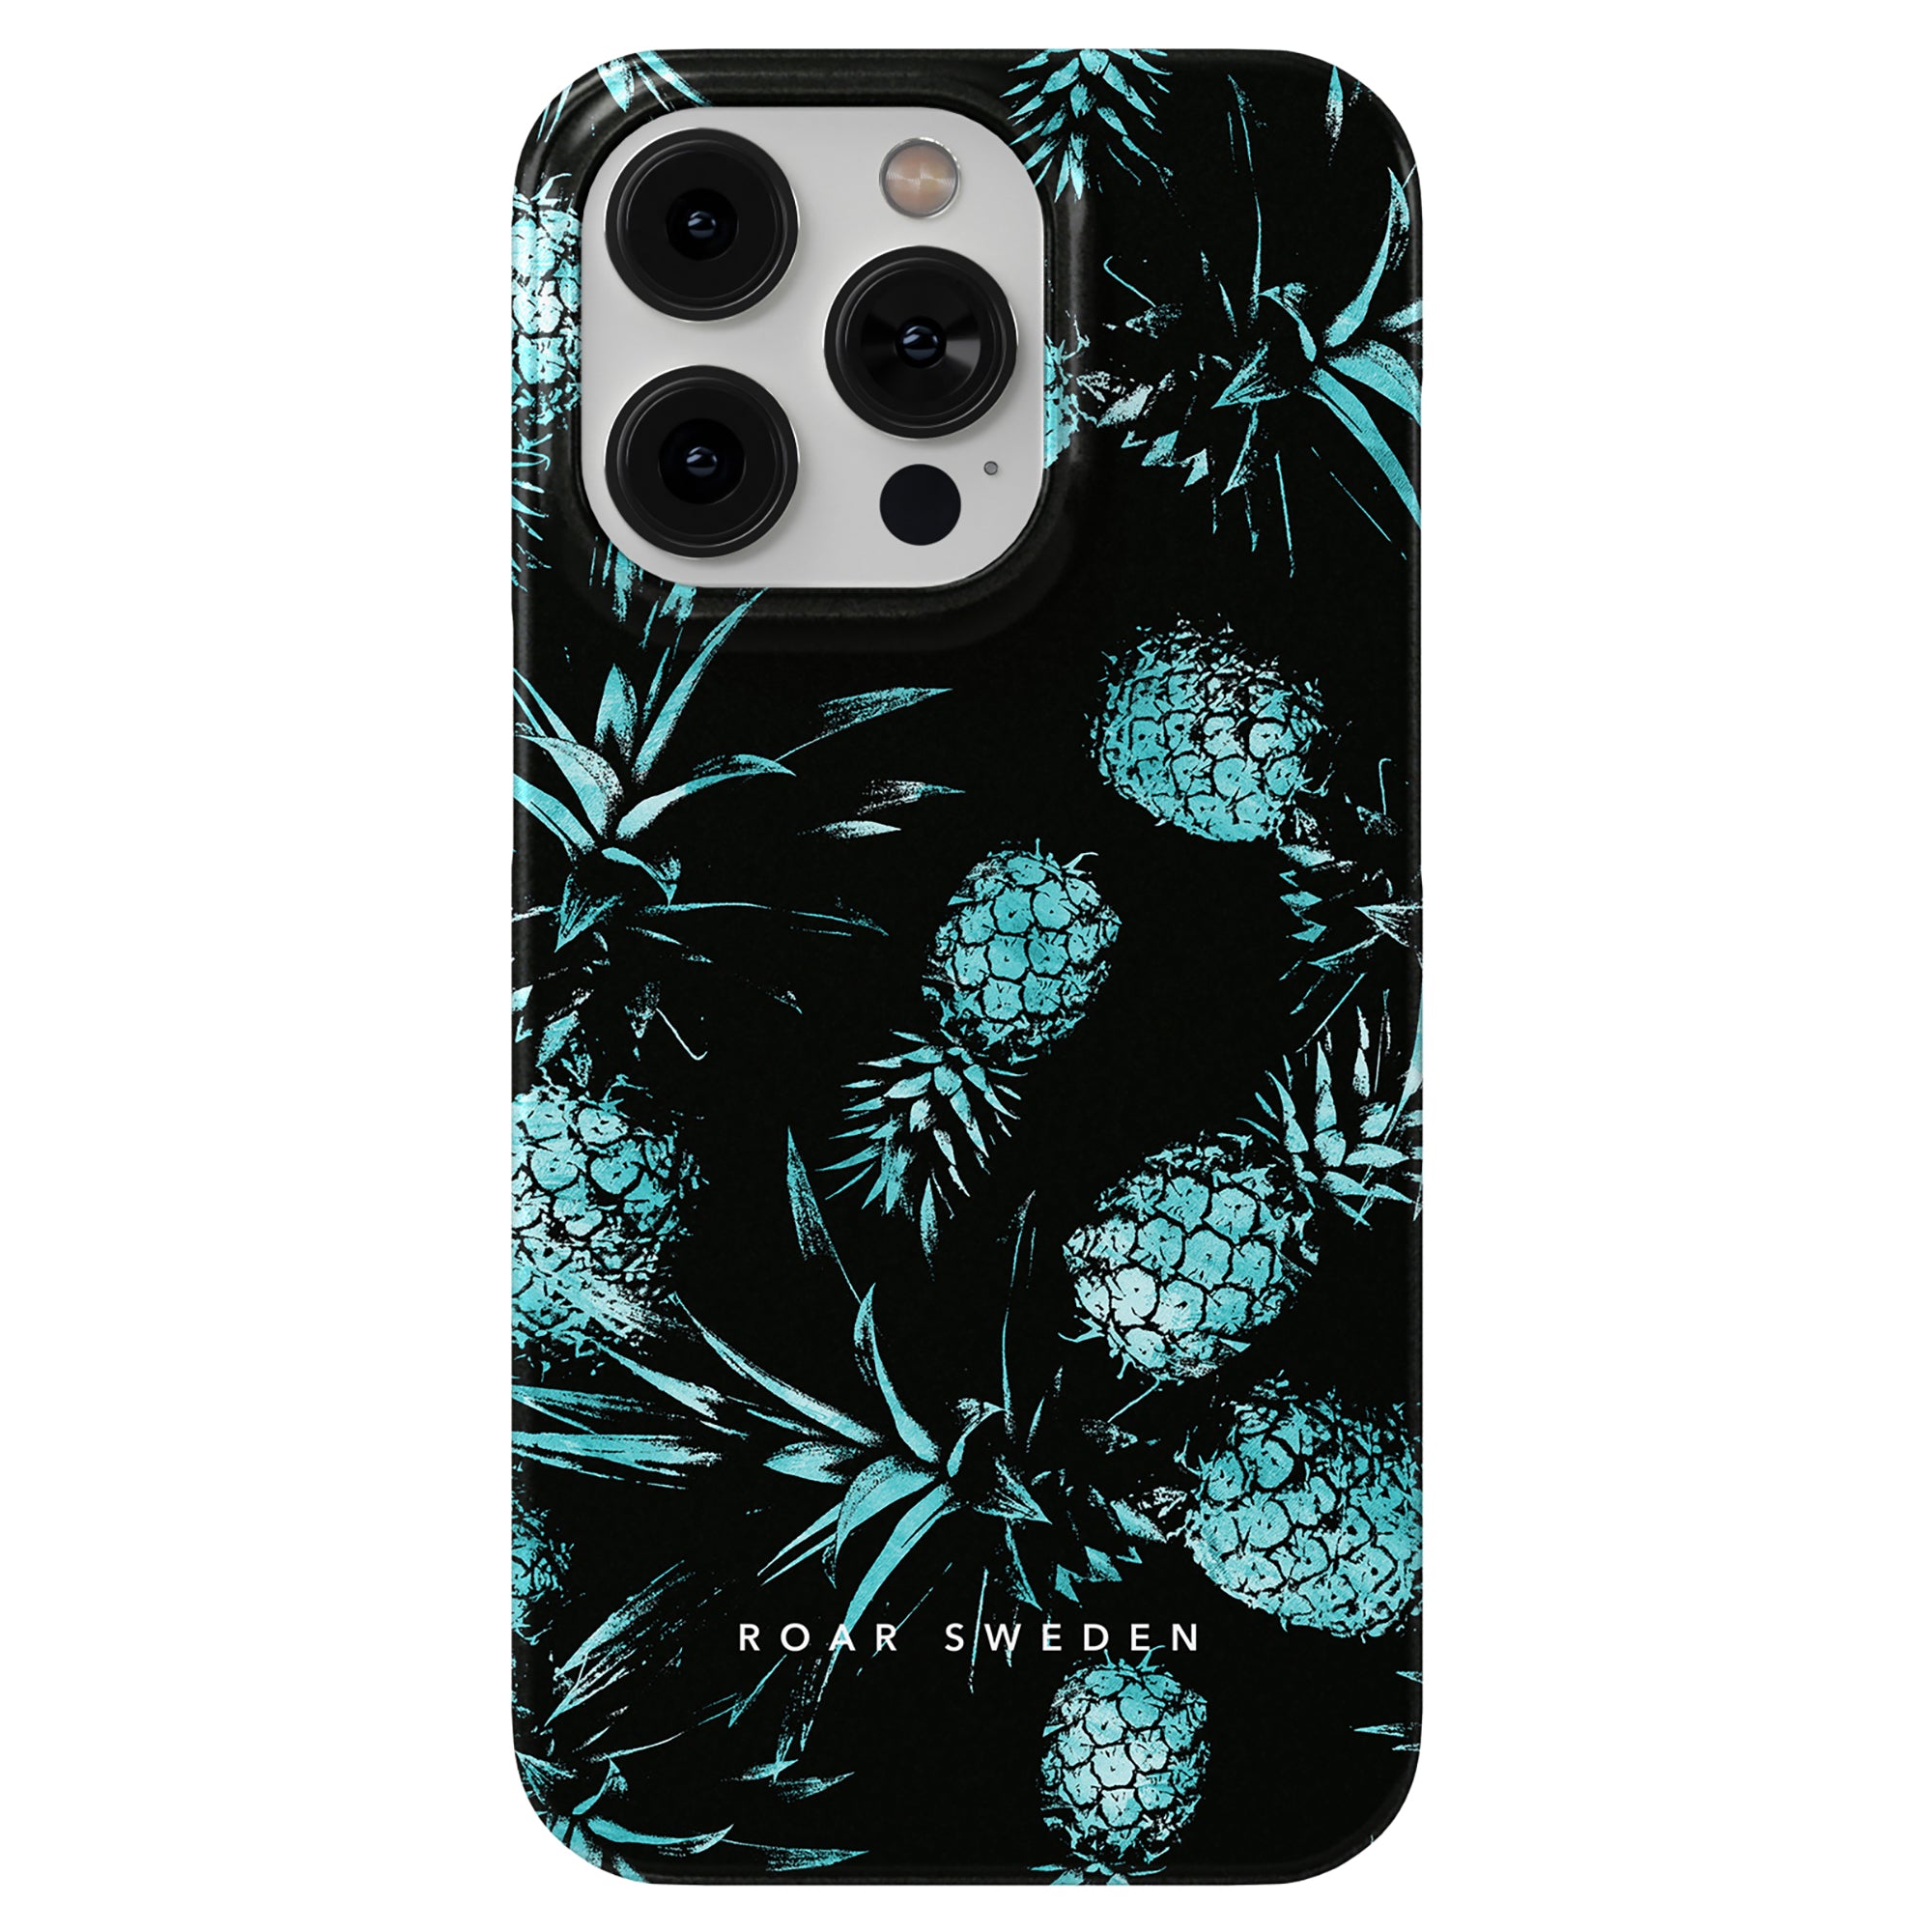 A smartphone with a Turquoise Pineapples - Slim case featuring a blue-green pineapple pattern from the Exotic Collection and text "ROAR SWEDEN" at the bottom.